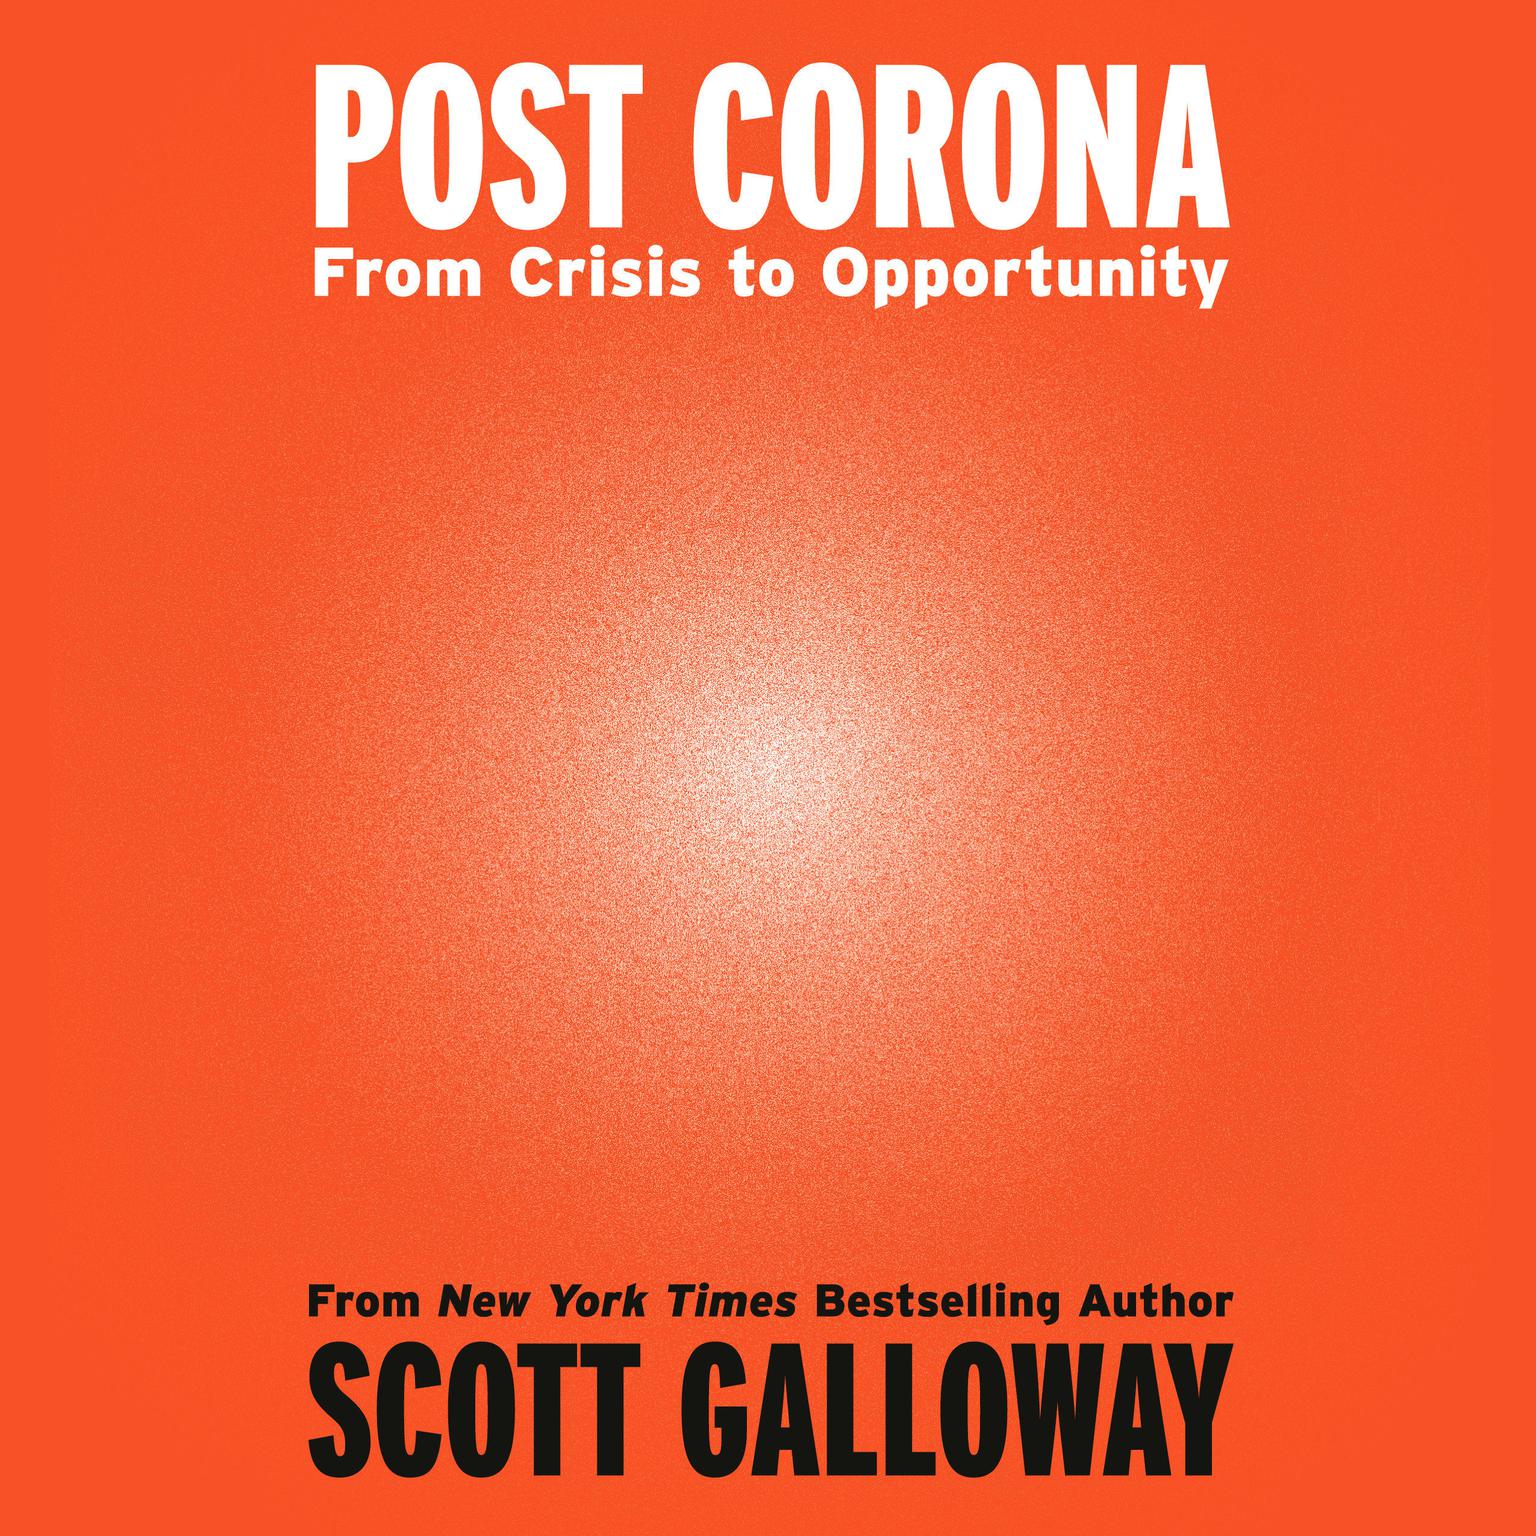 Post Corona: From Crisis to Opportunity Audiobook, by Scott Galloway